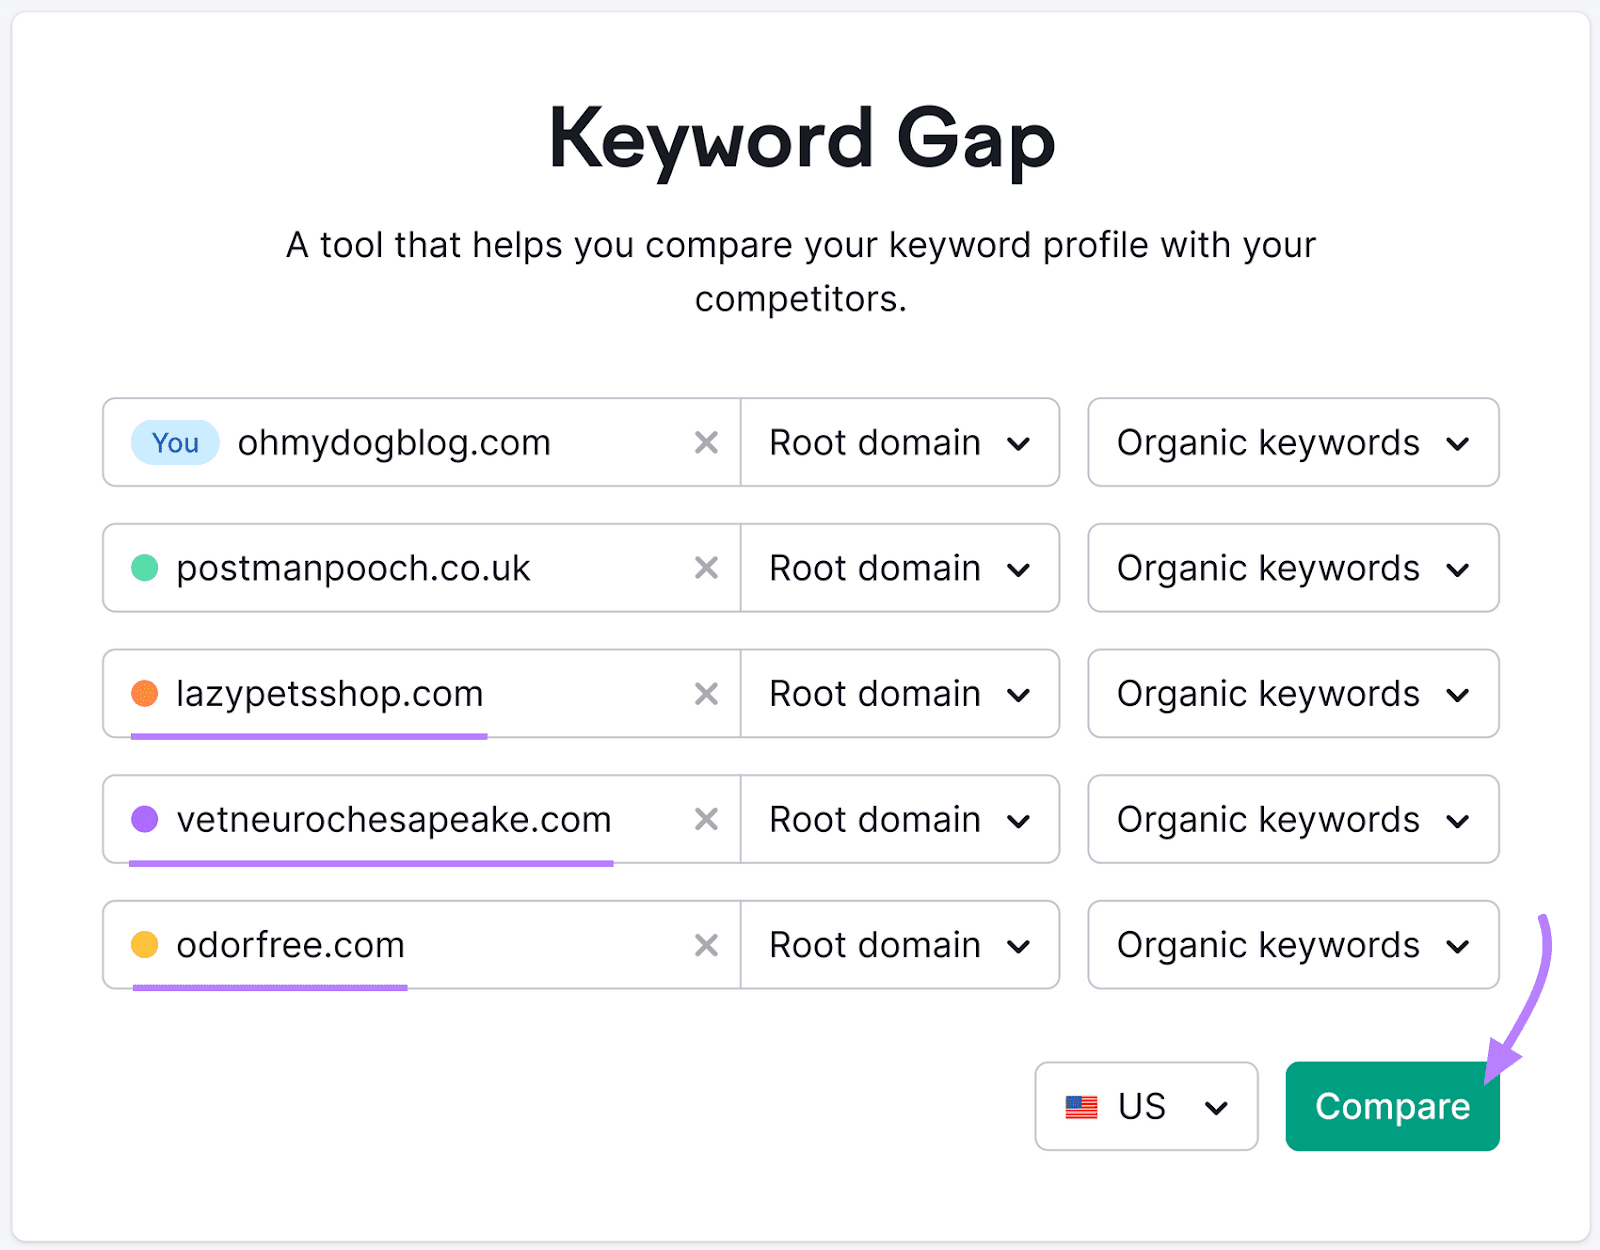 Keyword Gap tool search interface, with "ohmydogblog.com" competitors' domains added